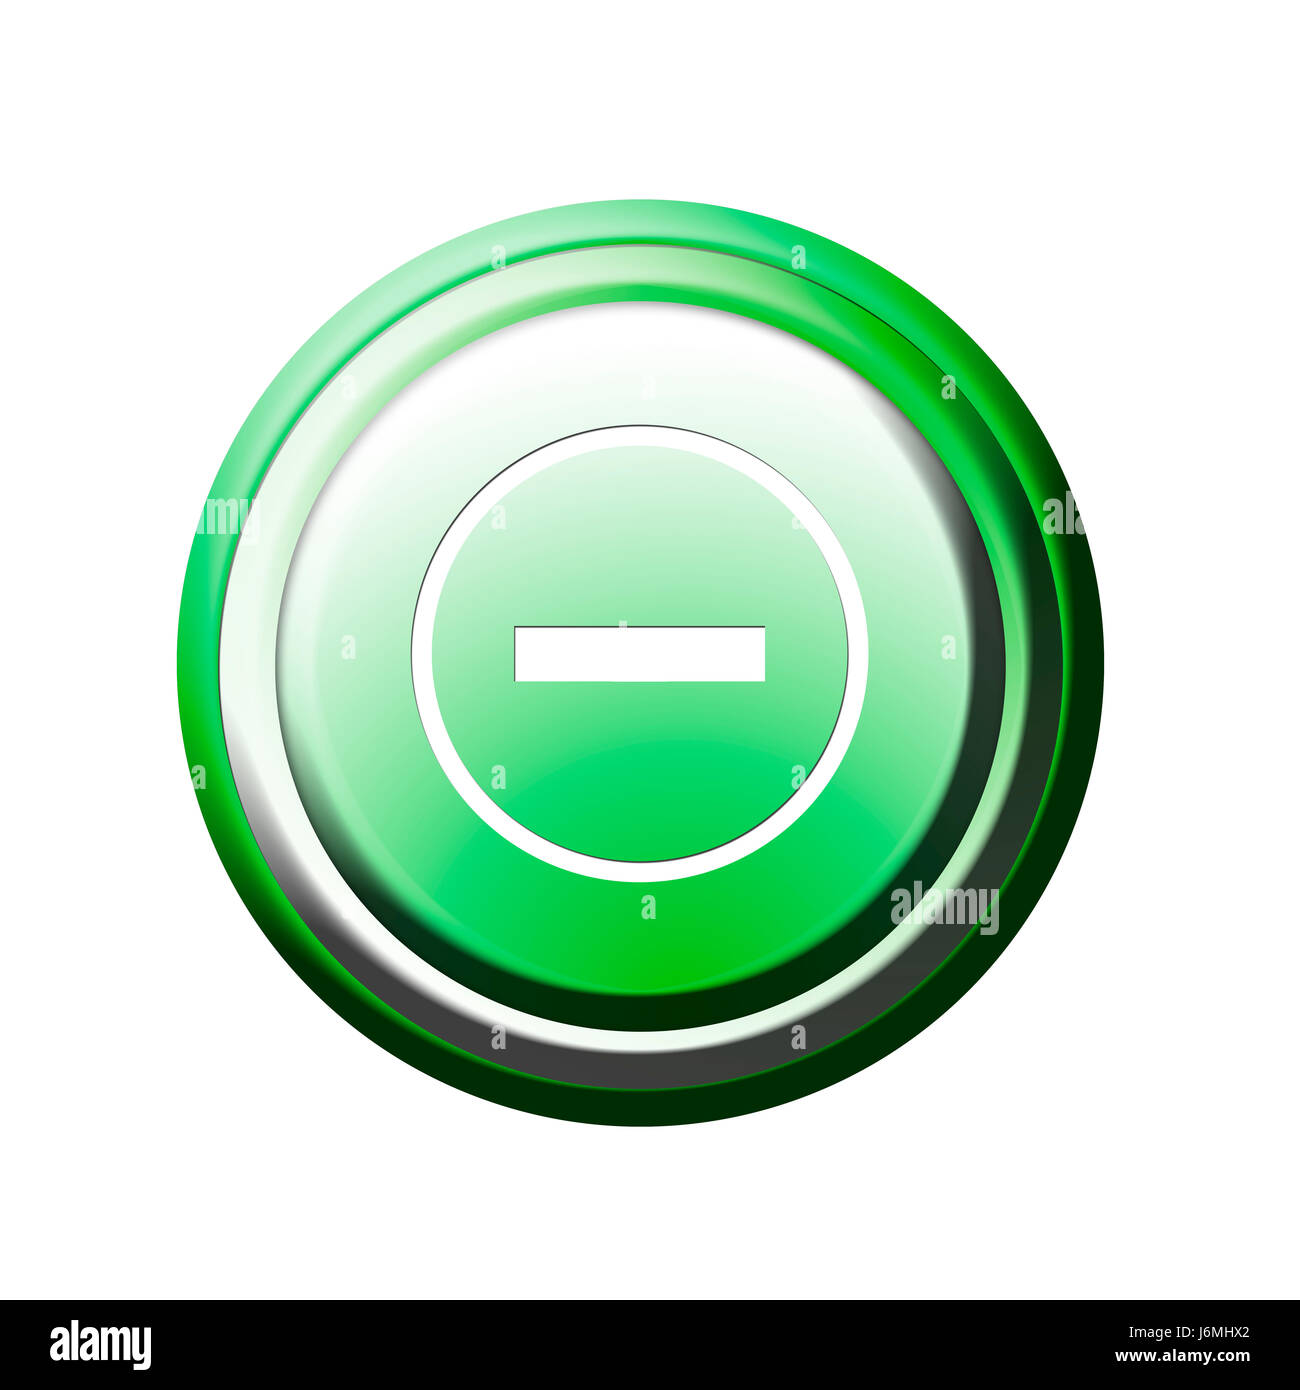 button minus smaller negative subtract isolated optional symbolic graphic Stock Photo